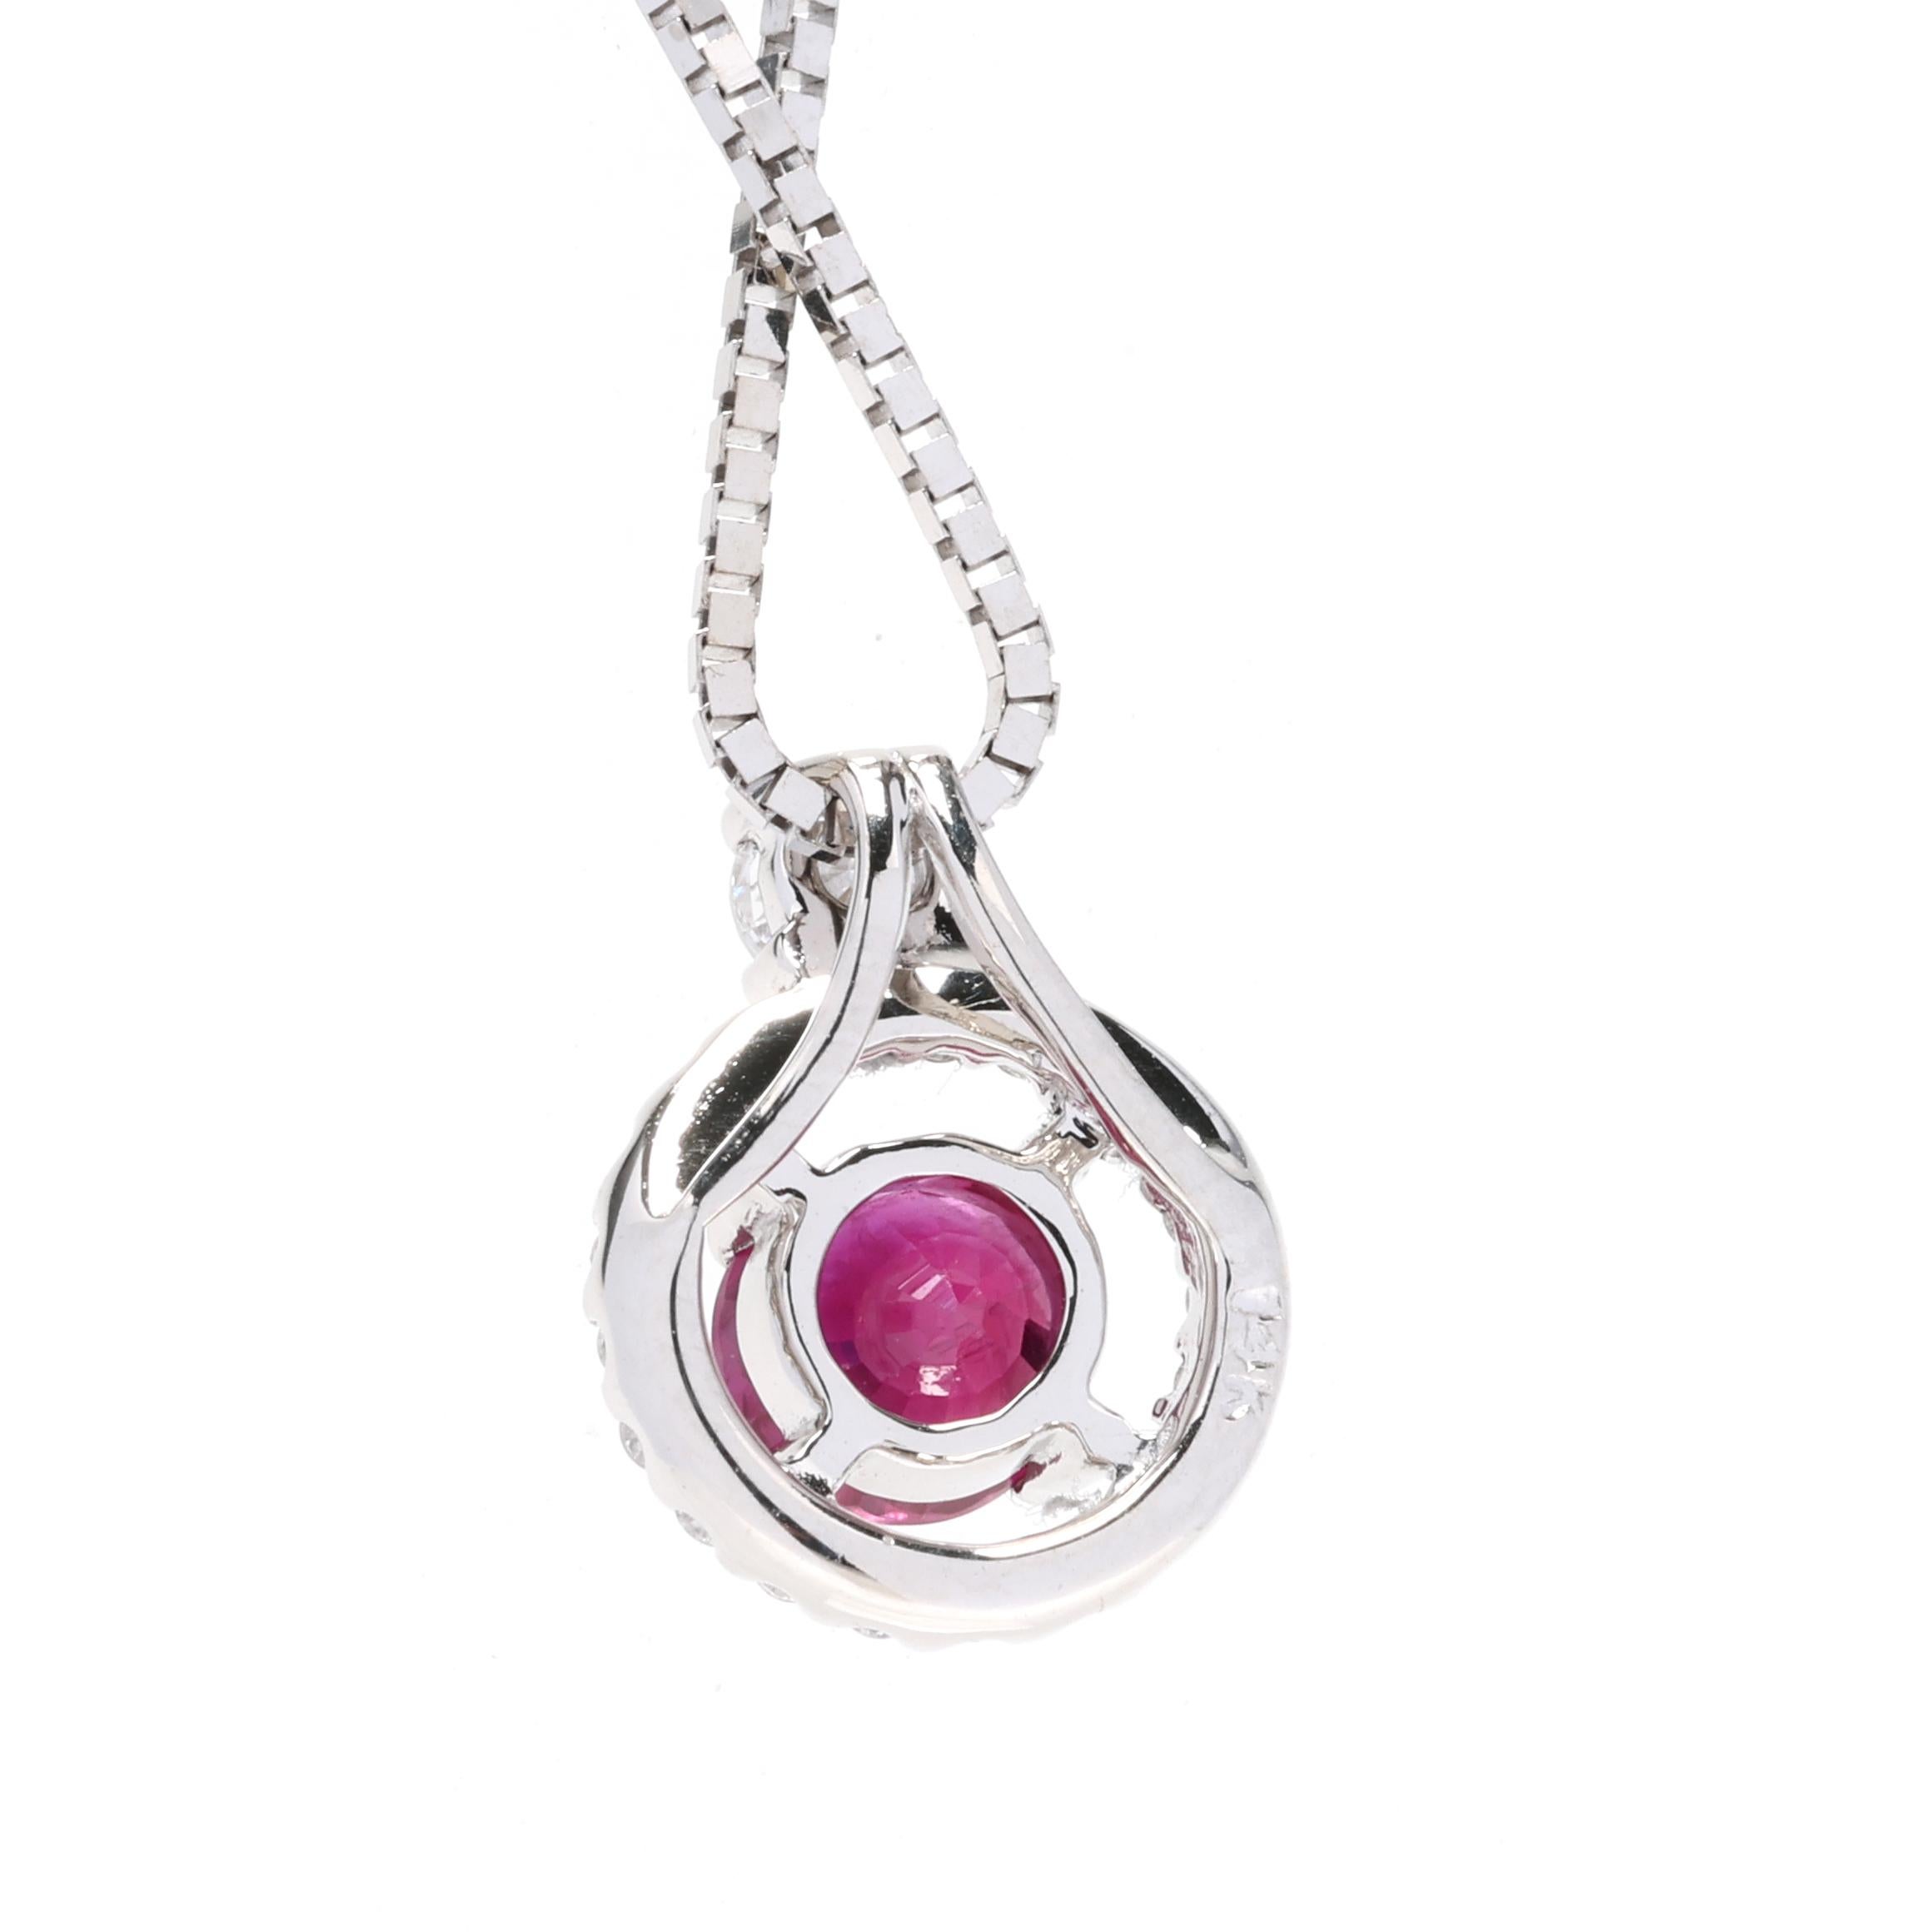 This stunning pendant necklace features a vibrant 0.47 carat total weight ruby gemstone surrounded by sparkling diamond accents. The pendant is crafted in 14k white gold and hangs on a 20-inch chain. The ruby is a rich red color and is beautifully